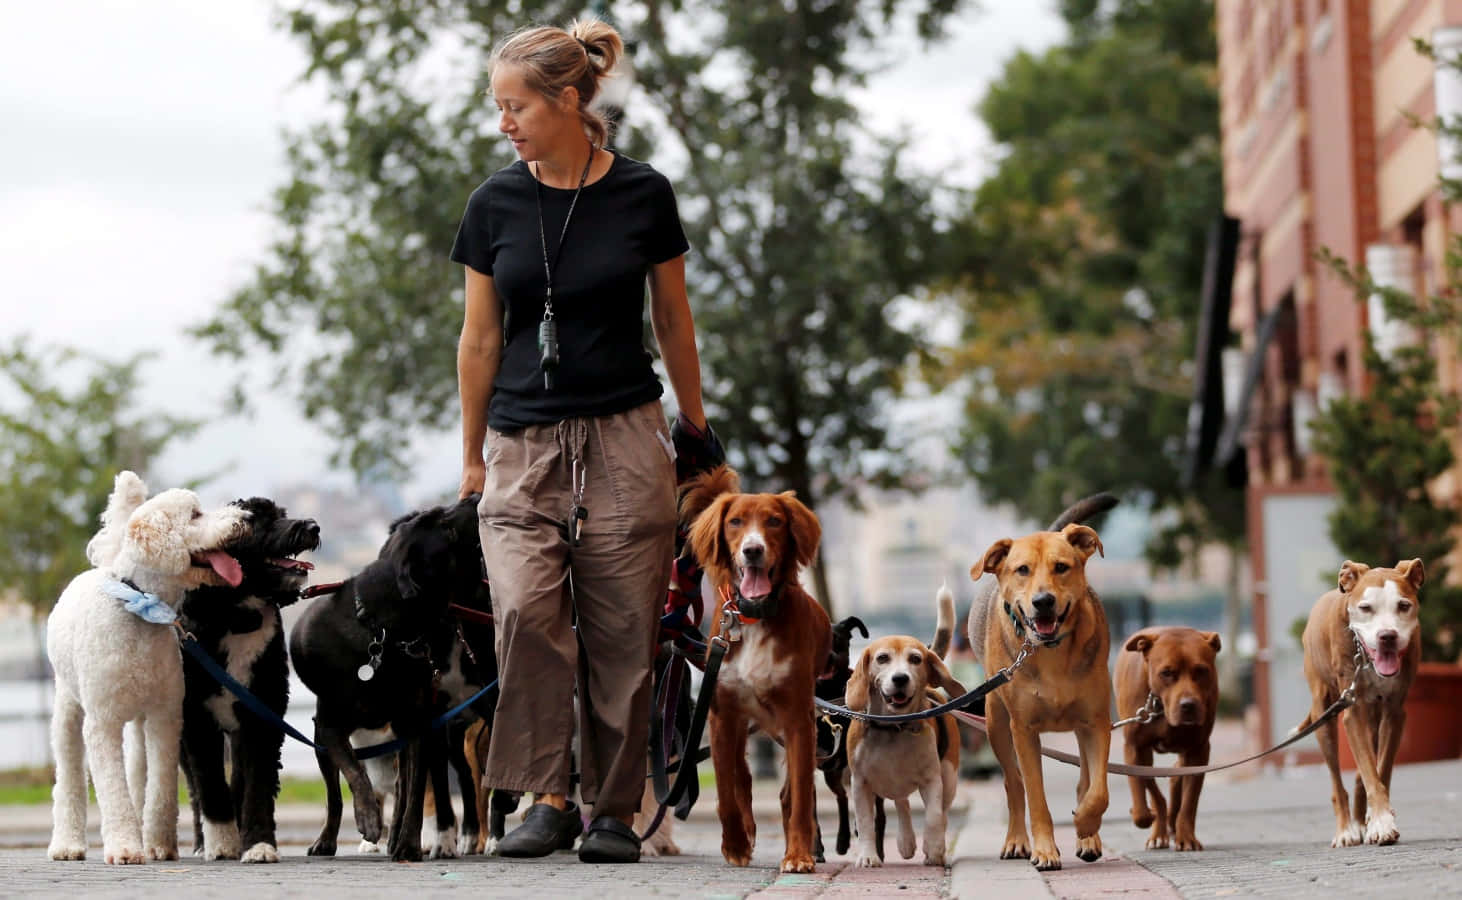 A Woman Walking A Group Of Dogs On A Sidewalk